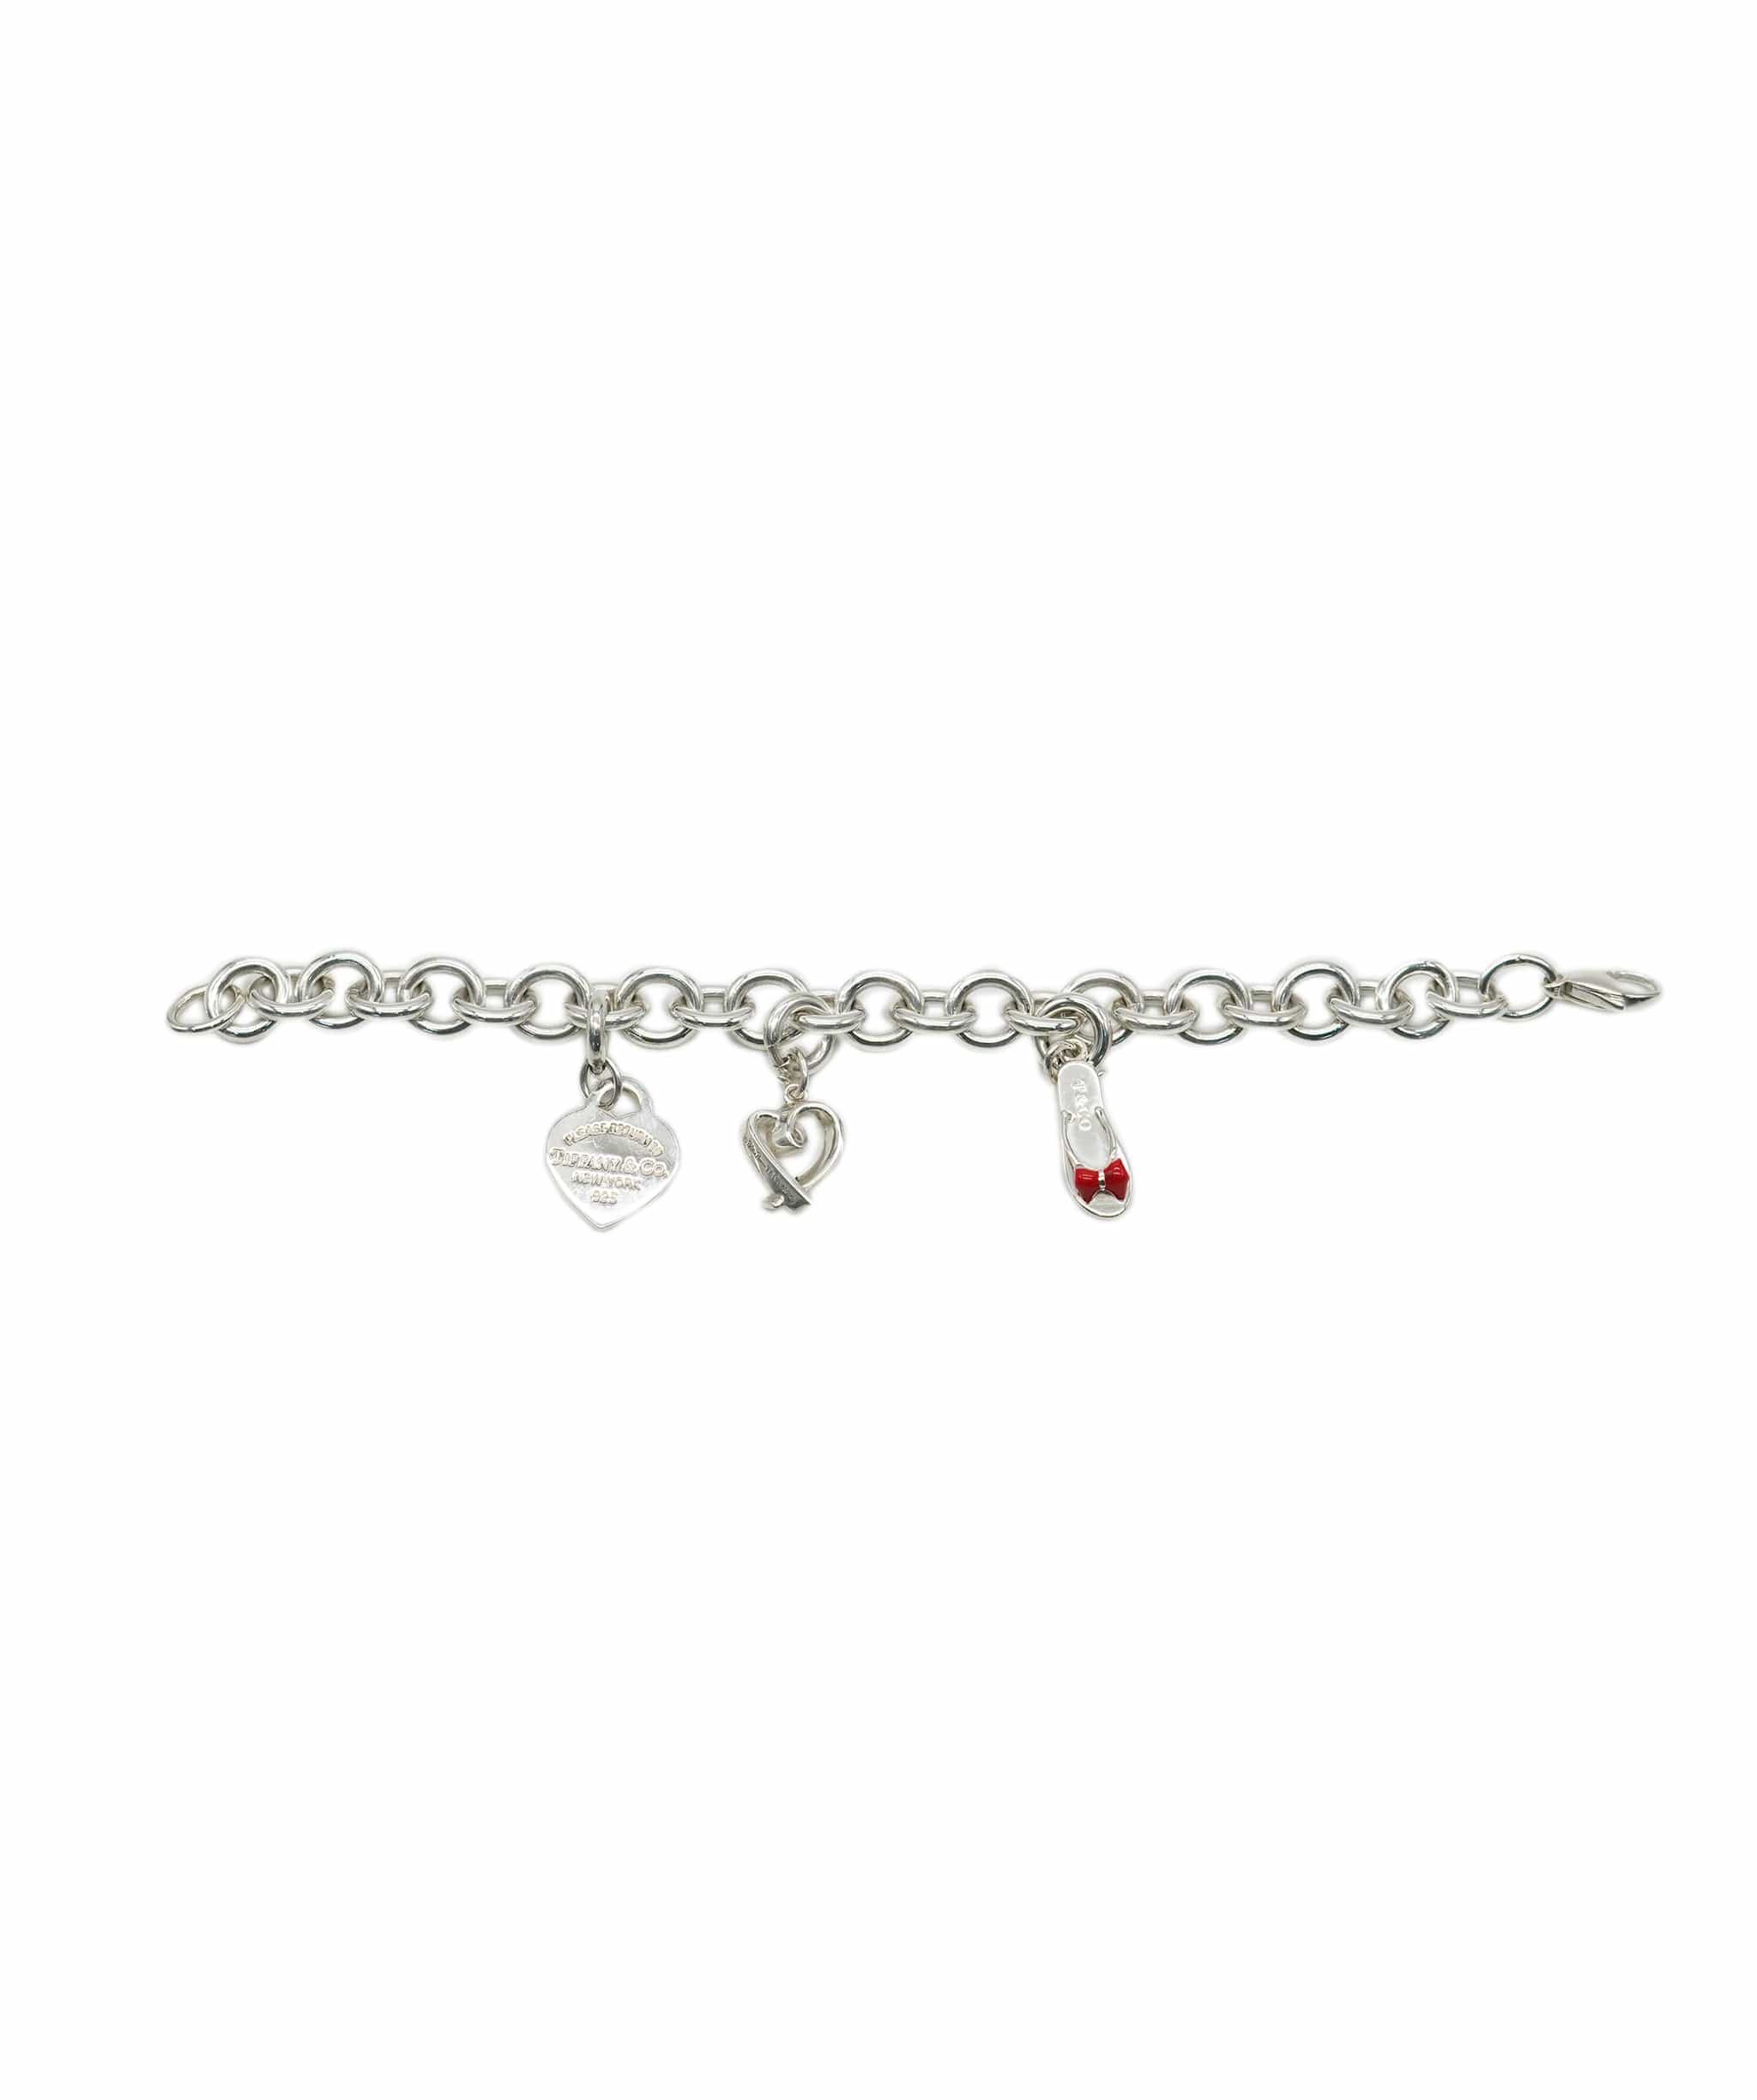 Tiffany & Co. Tiffany & Co. Sterling Silver Charm Bracelet With 3 Charms ABC0575